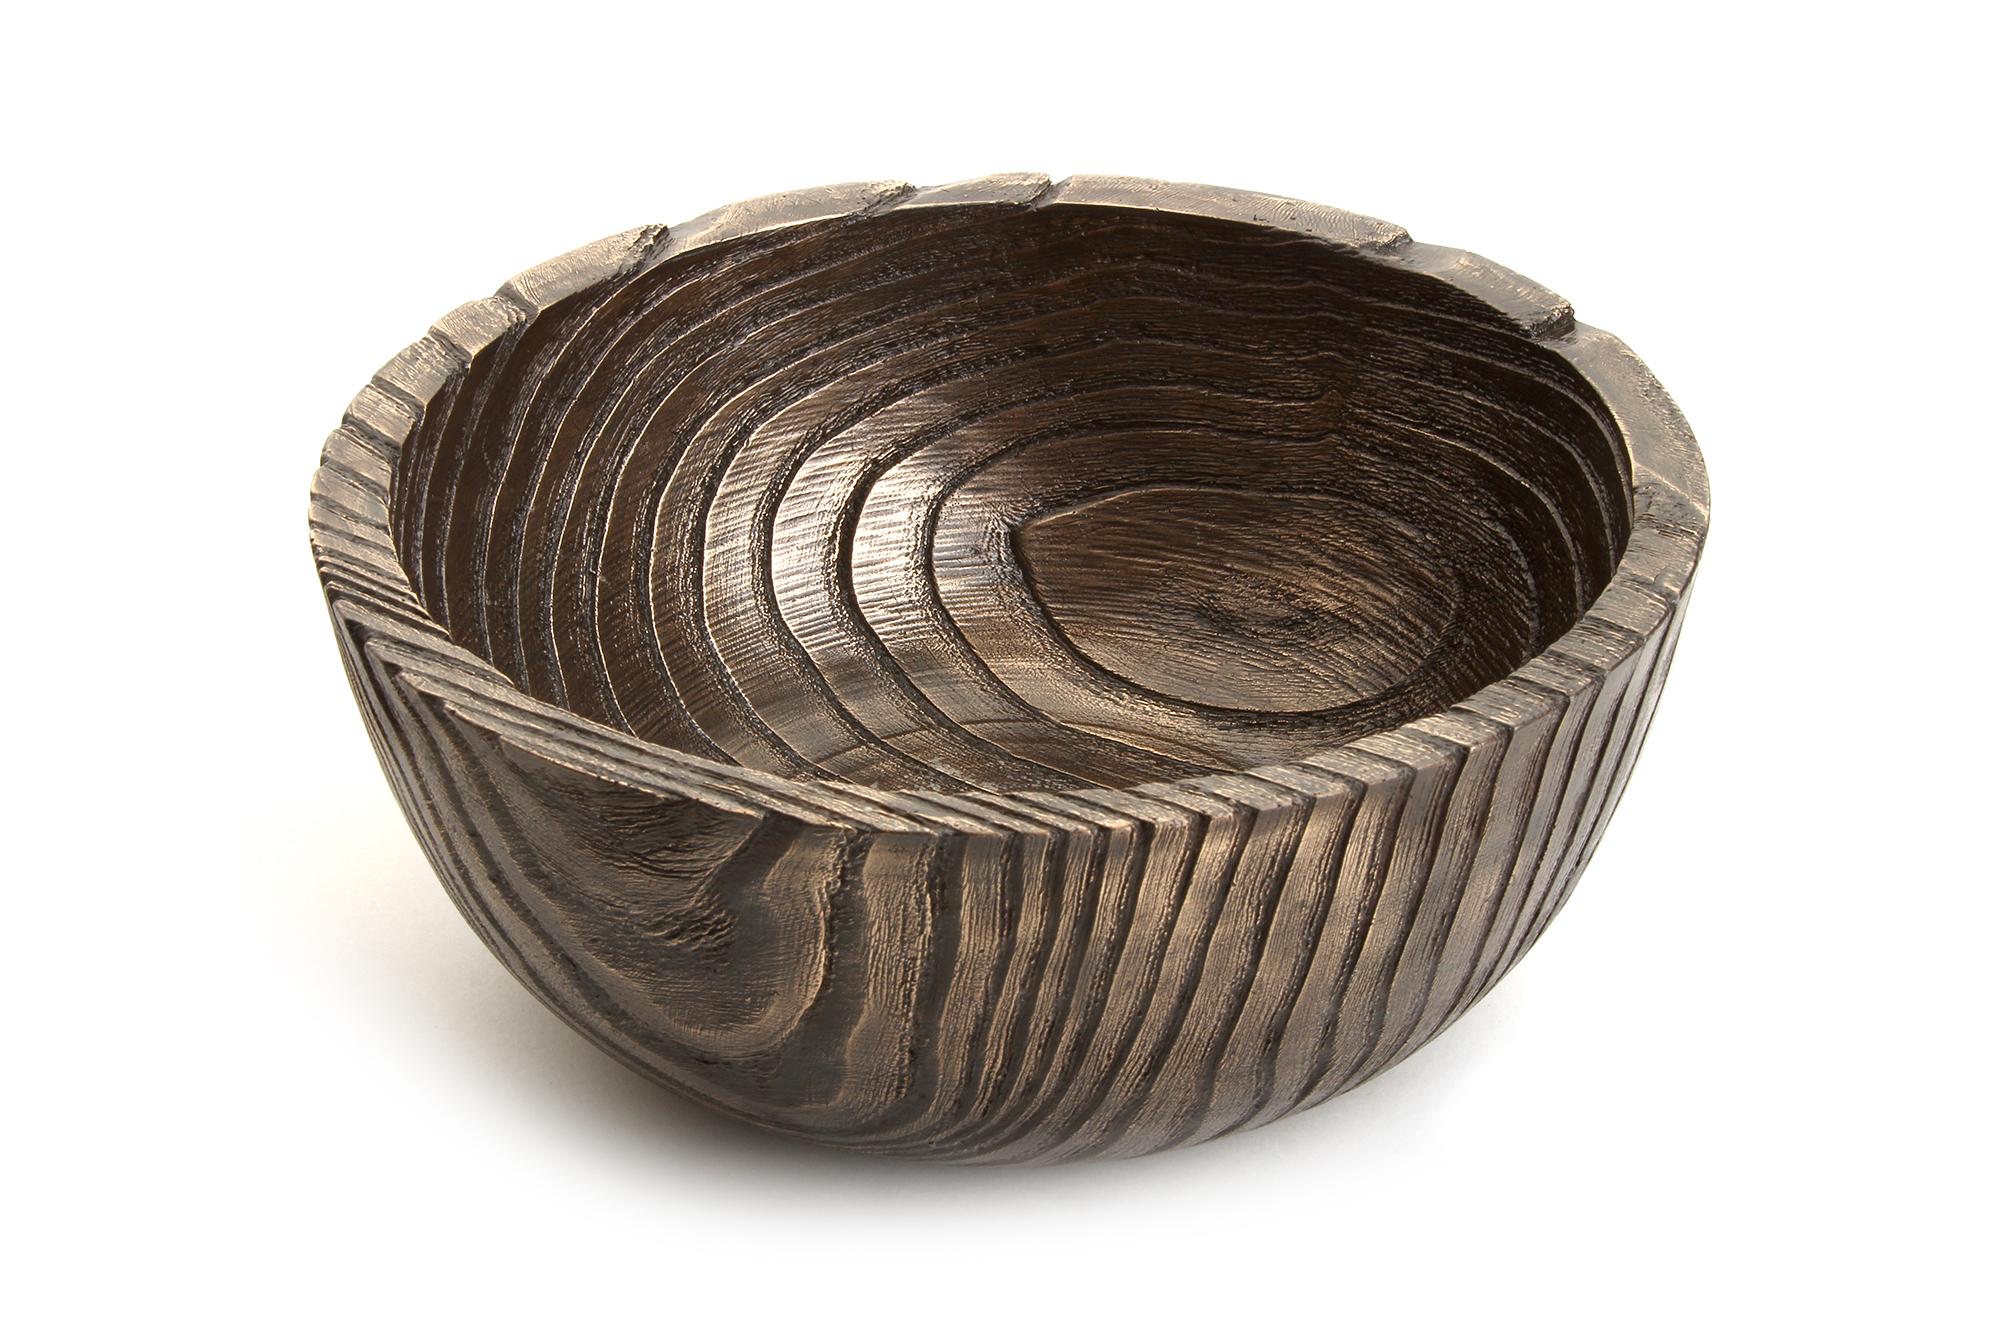 Solid Bronze Set ‘Everest’, ‘Alpine’ and ‘Flora’ Bowls with Wood Grain Texture For Sale 4